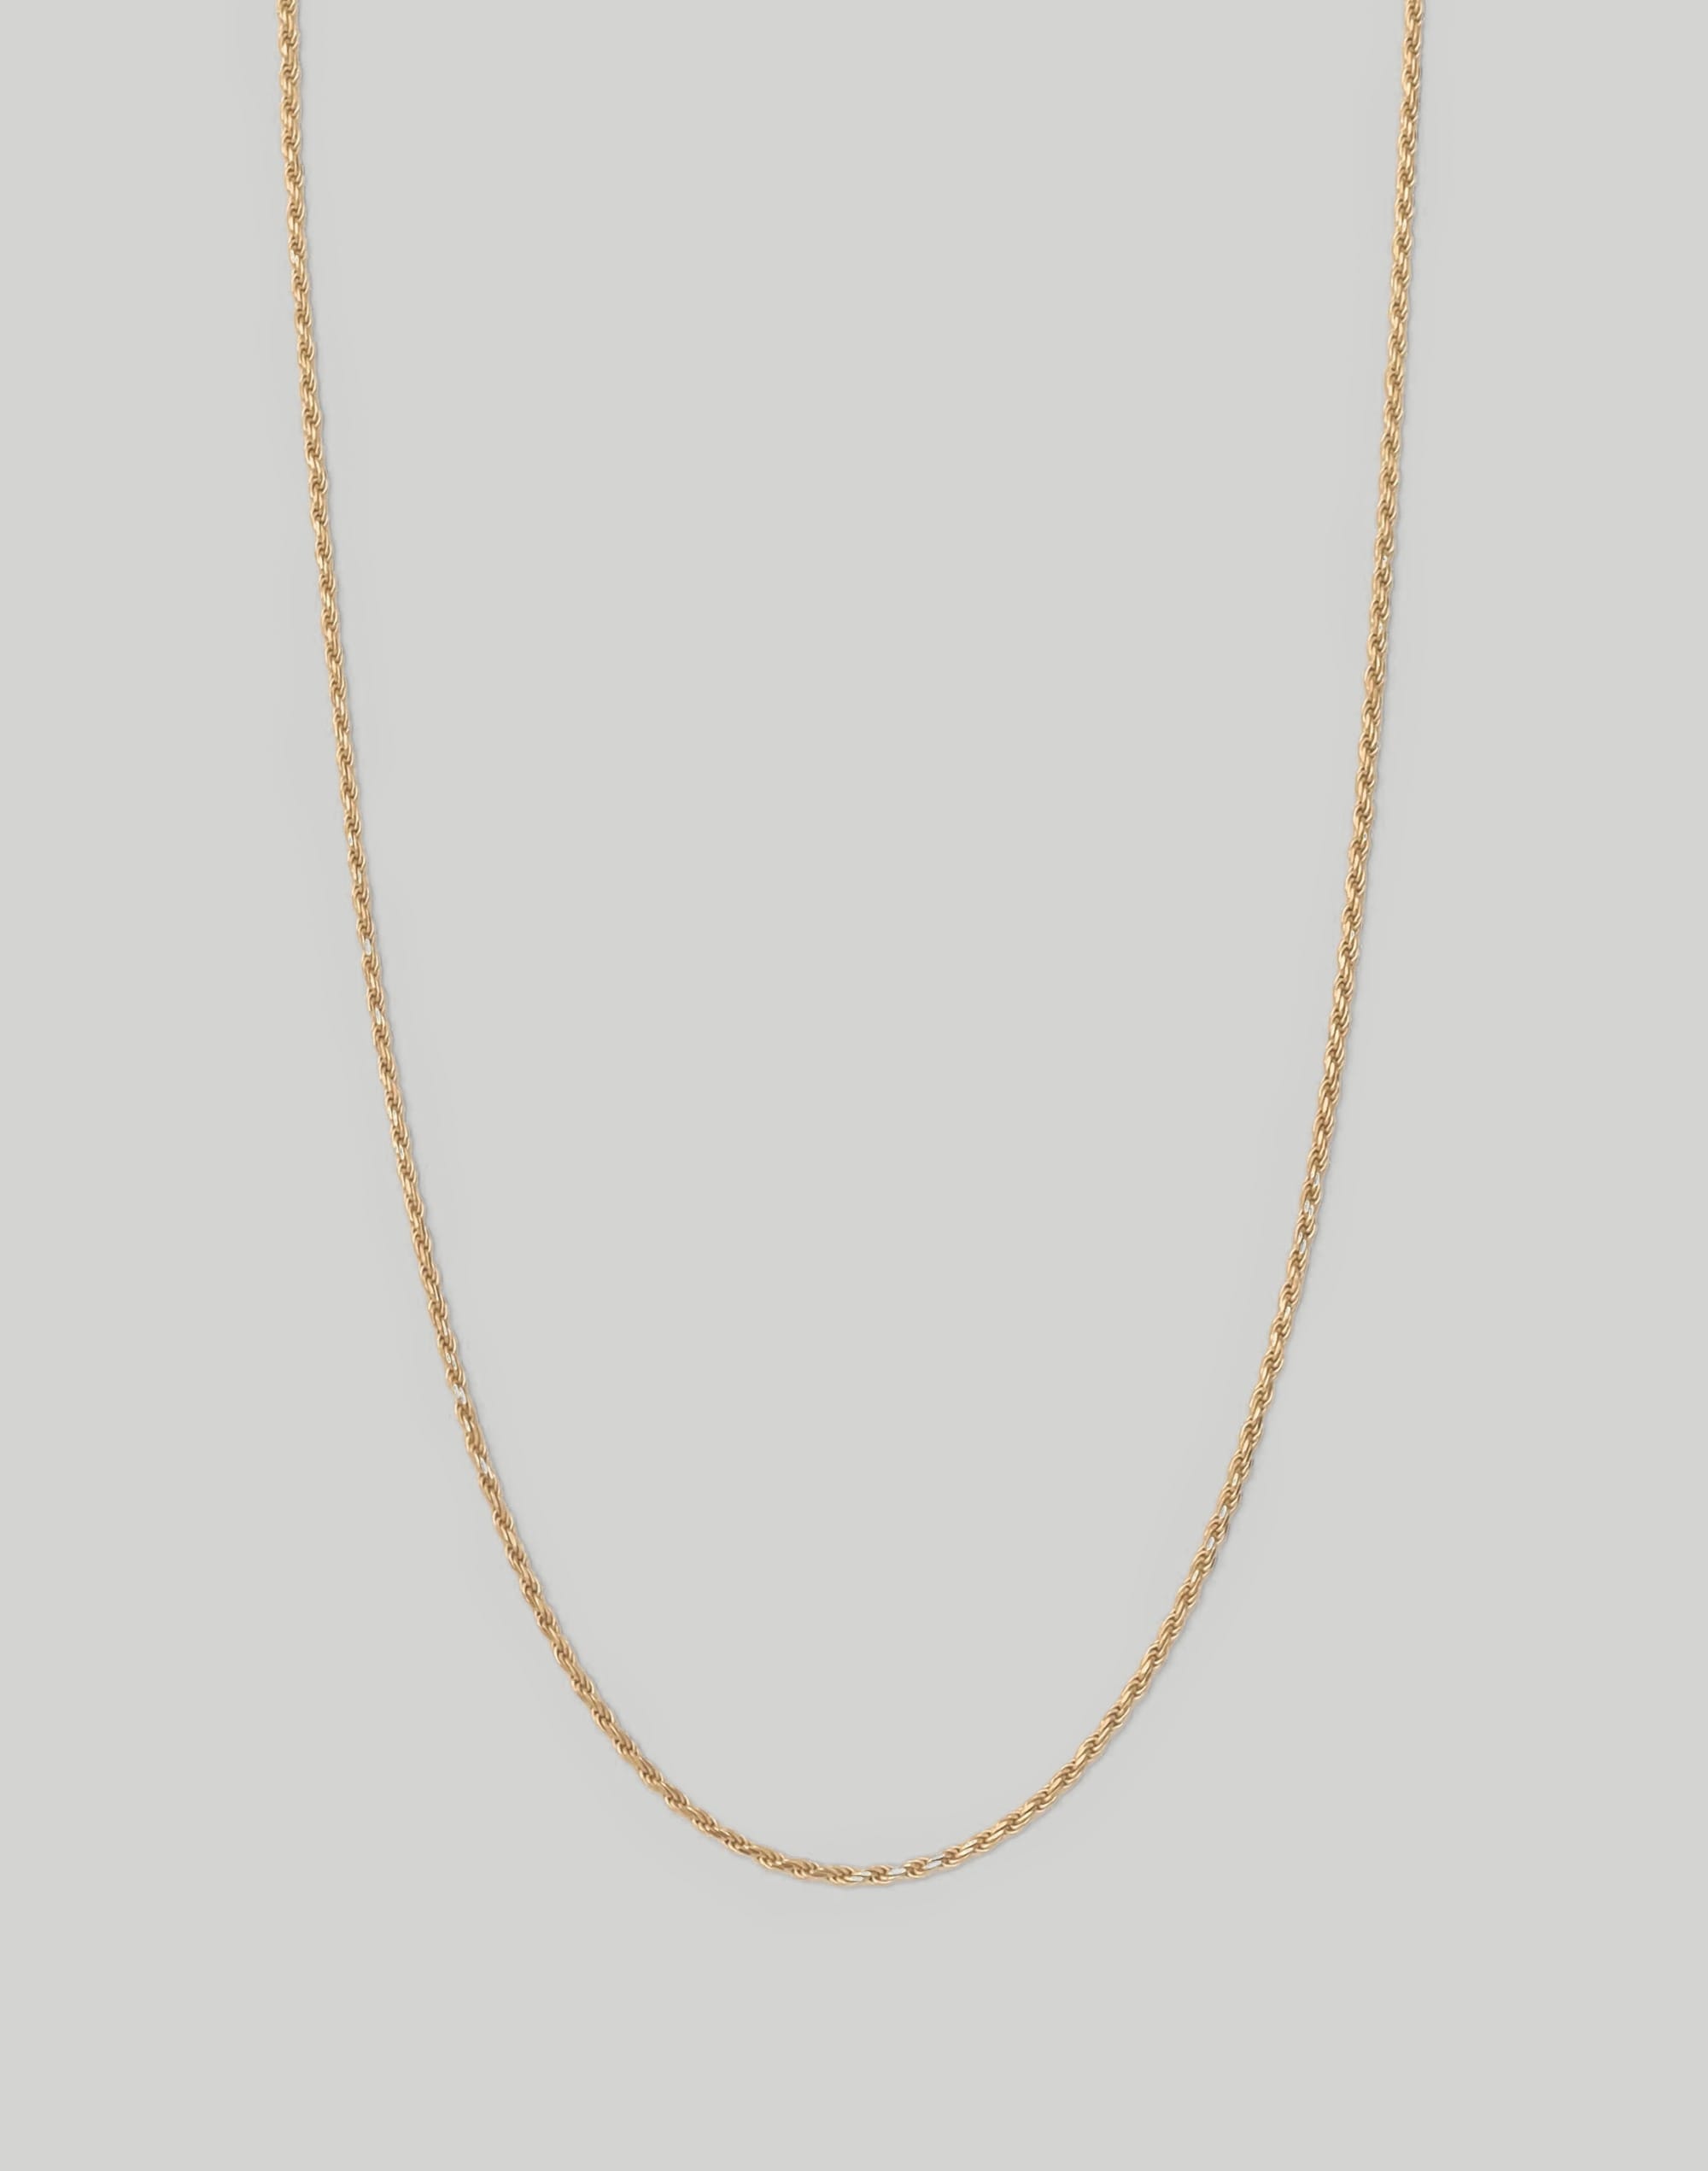 Kinn™ Petite Rope Chain Necklace